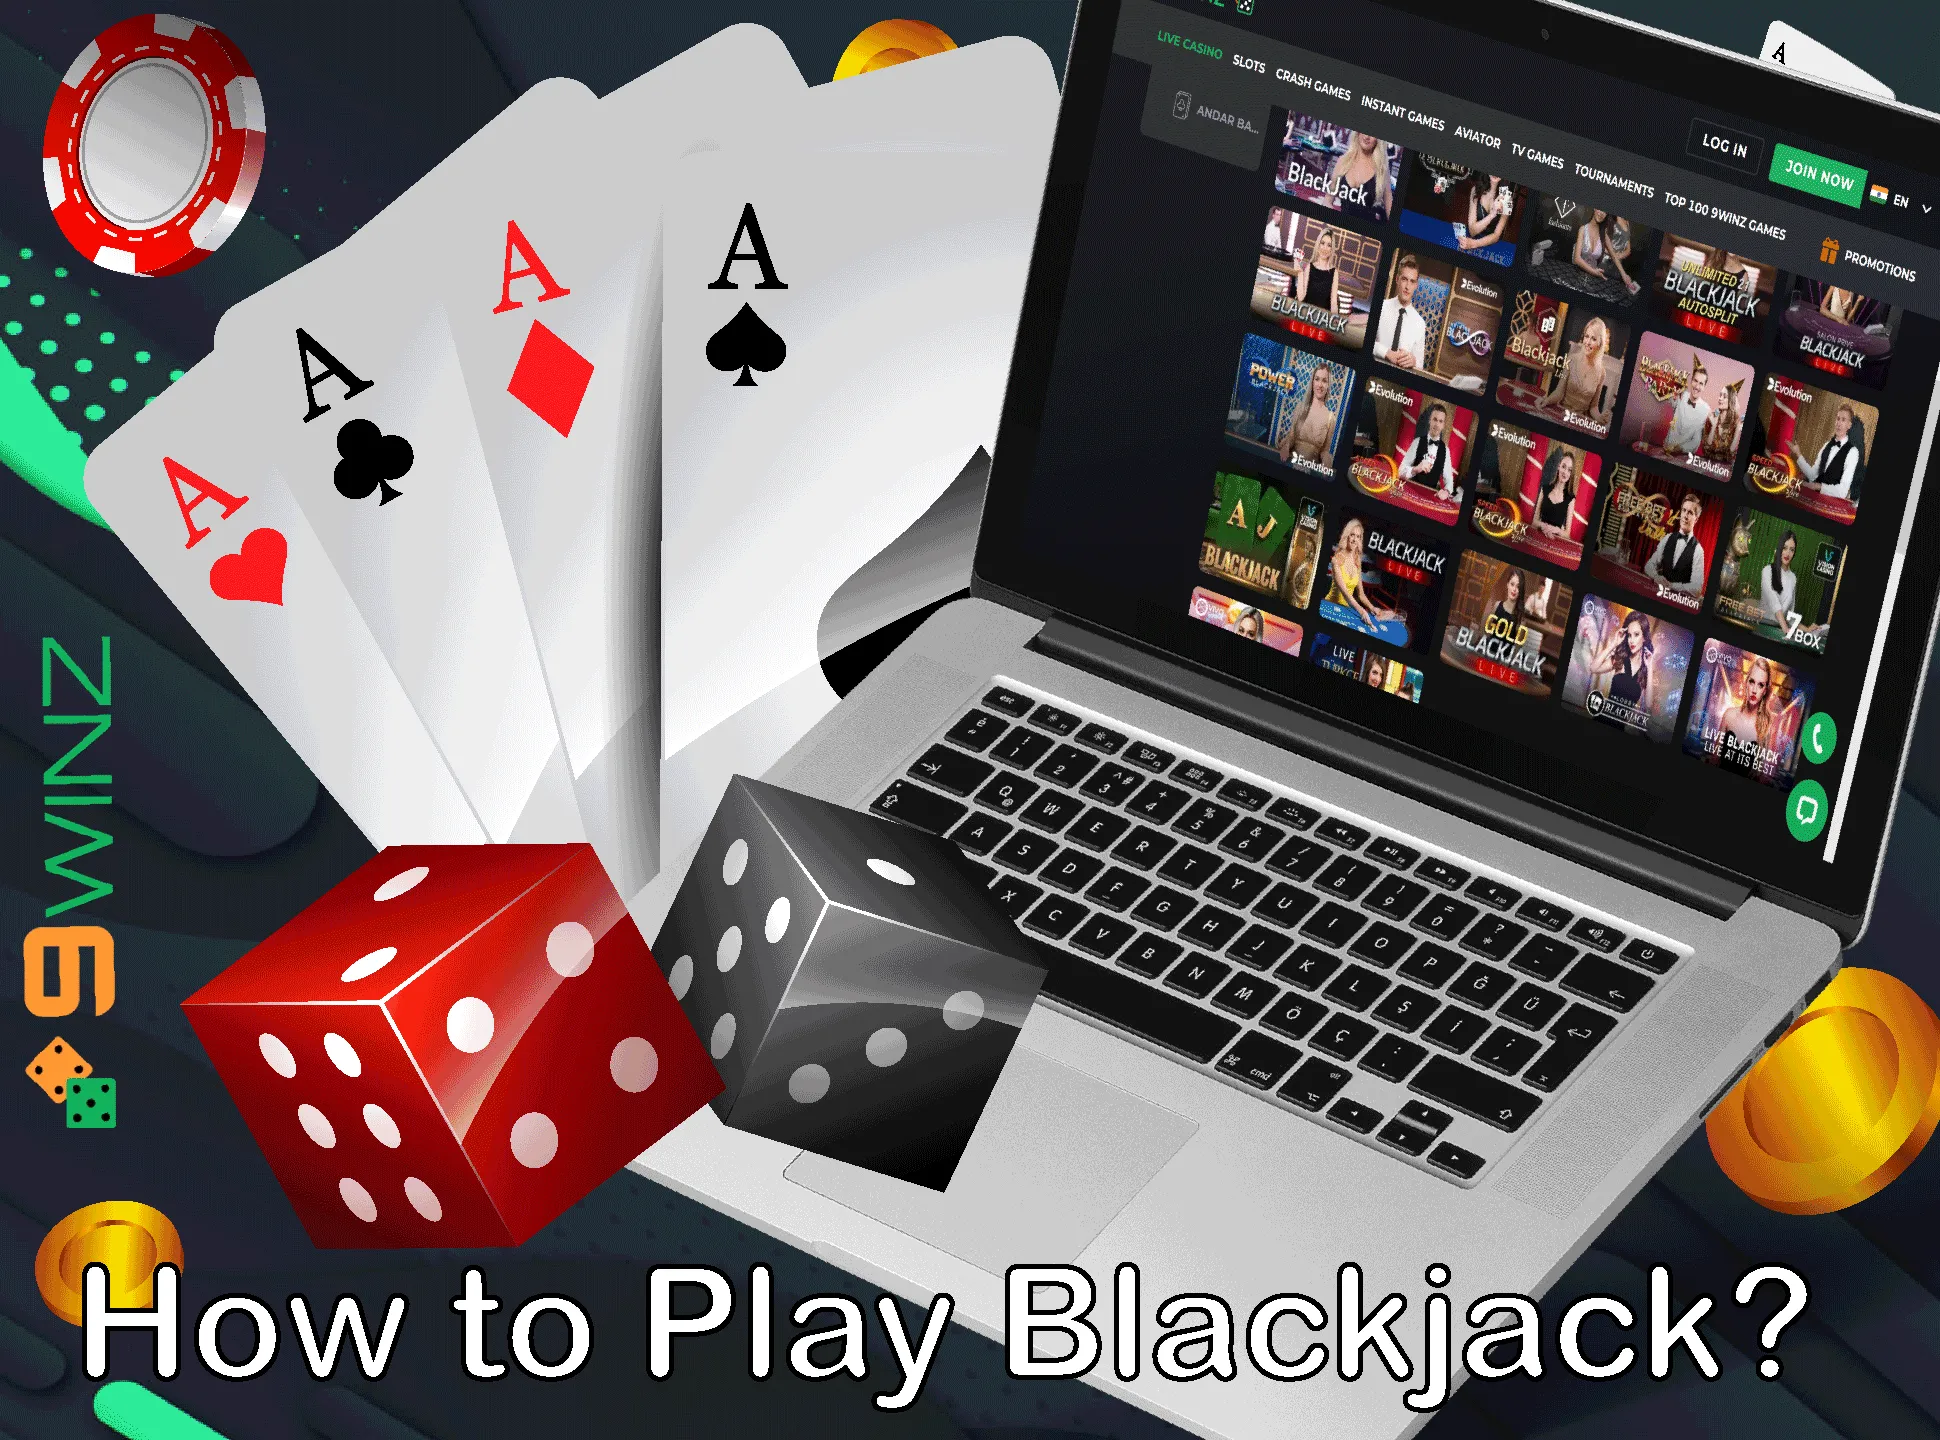 It's easy to play blackjack at the 9winz casino.